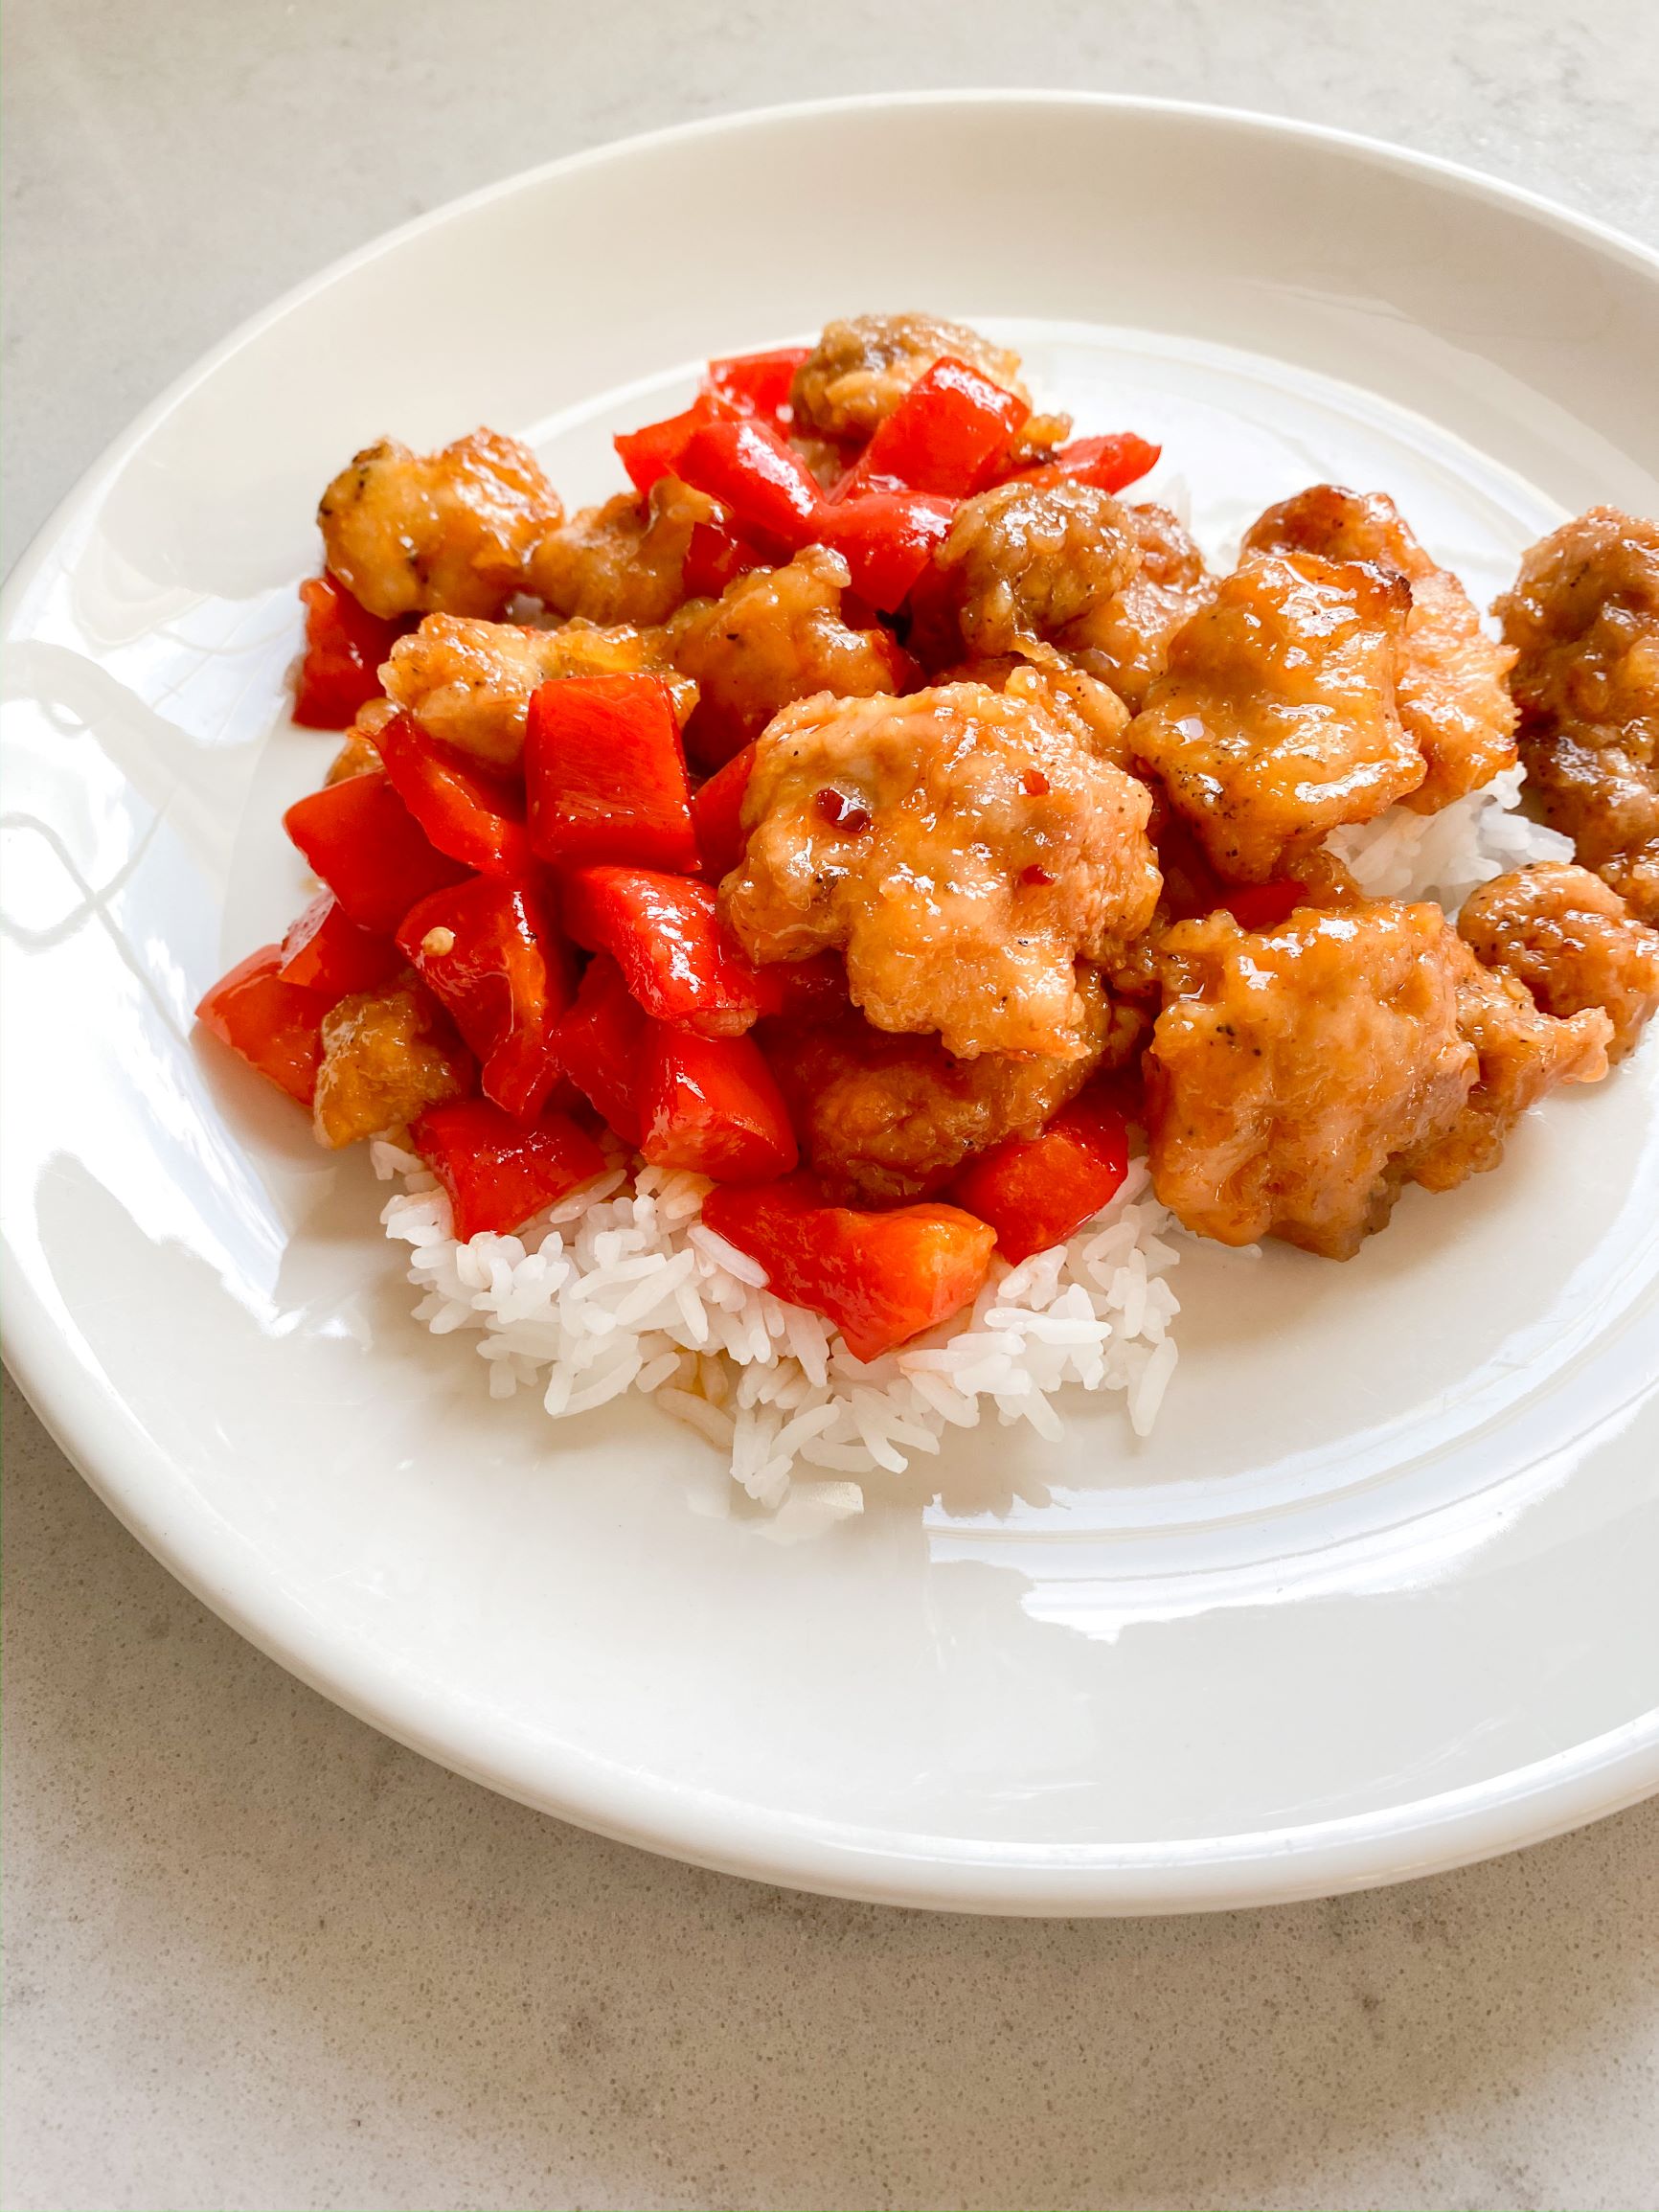 Amazing homemade sweet and sour chicken recipe - gluten free and so delicious! - jane at home